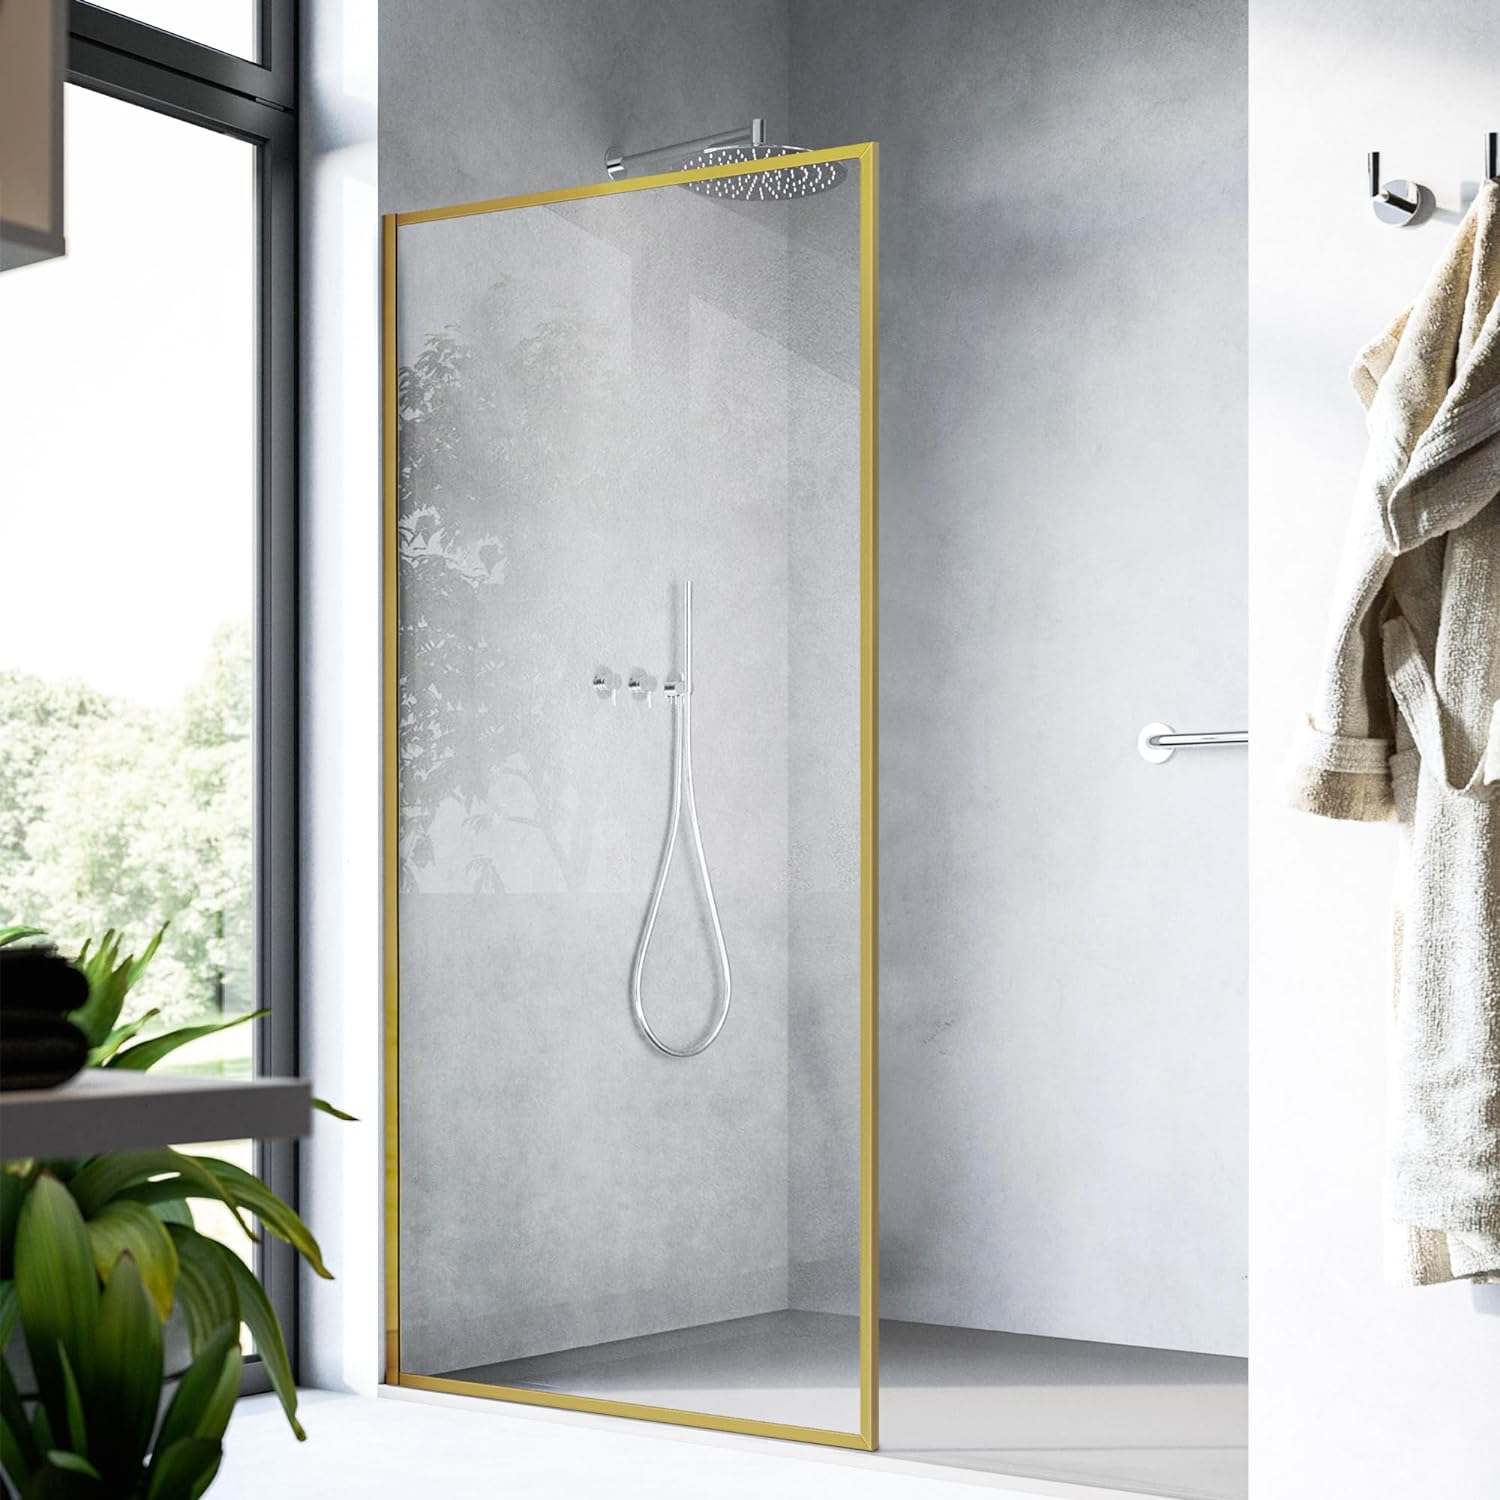 How Wide Should A Fixed Glass Shower Panel Be